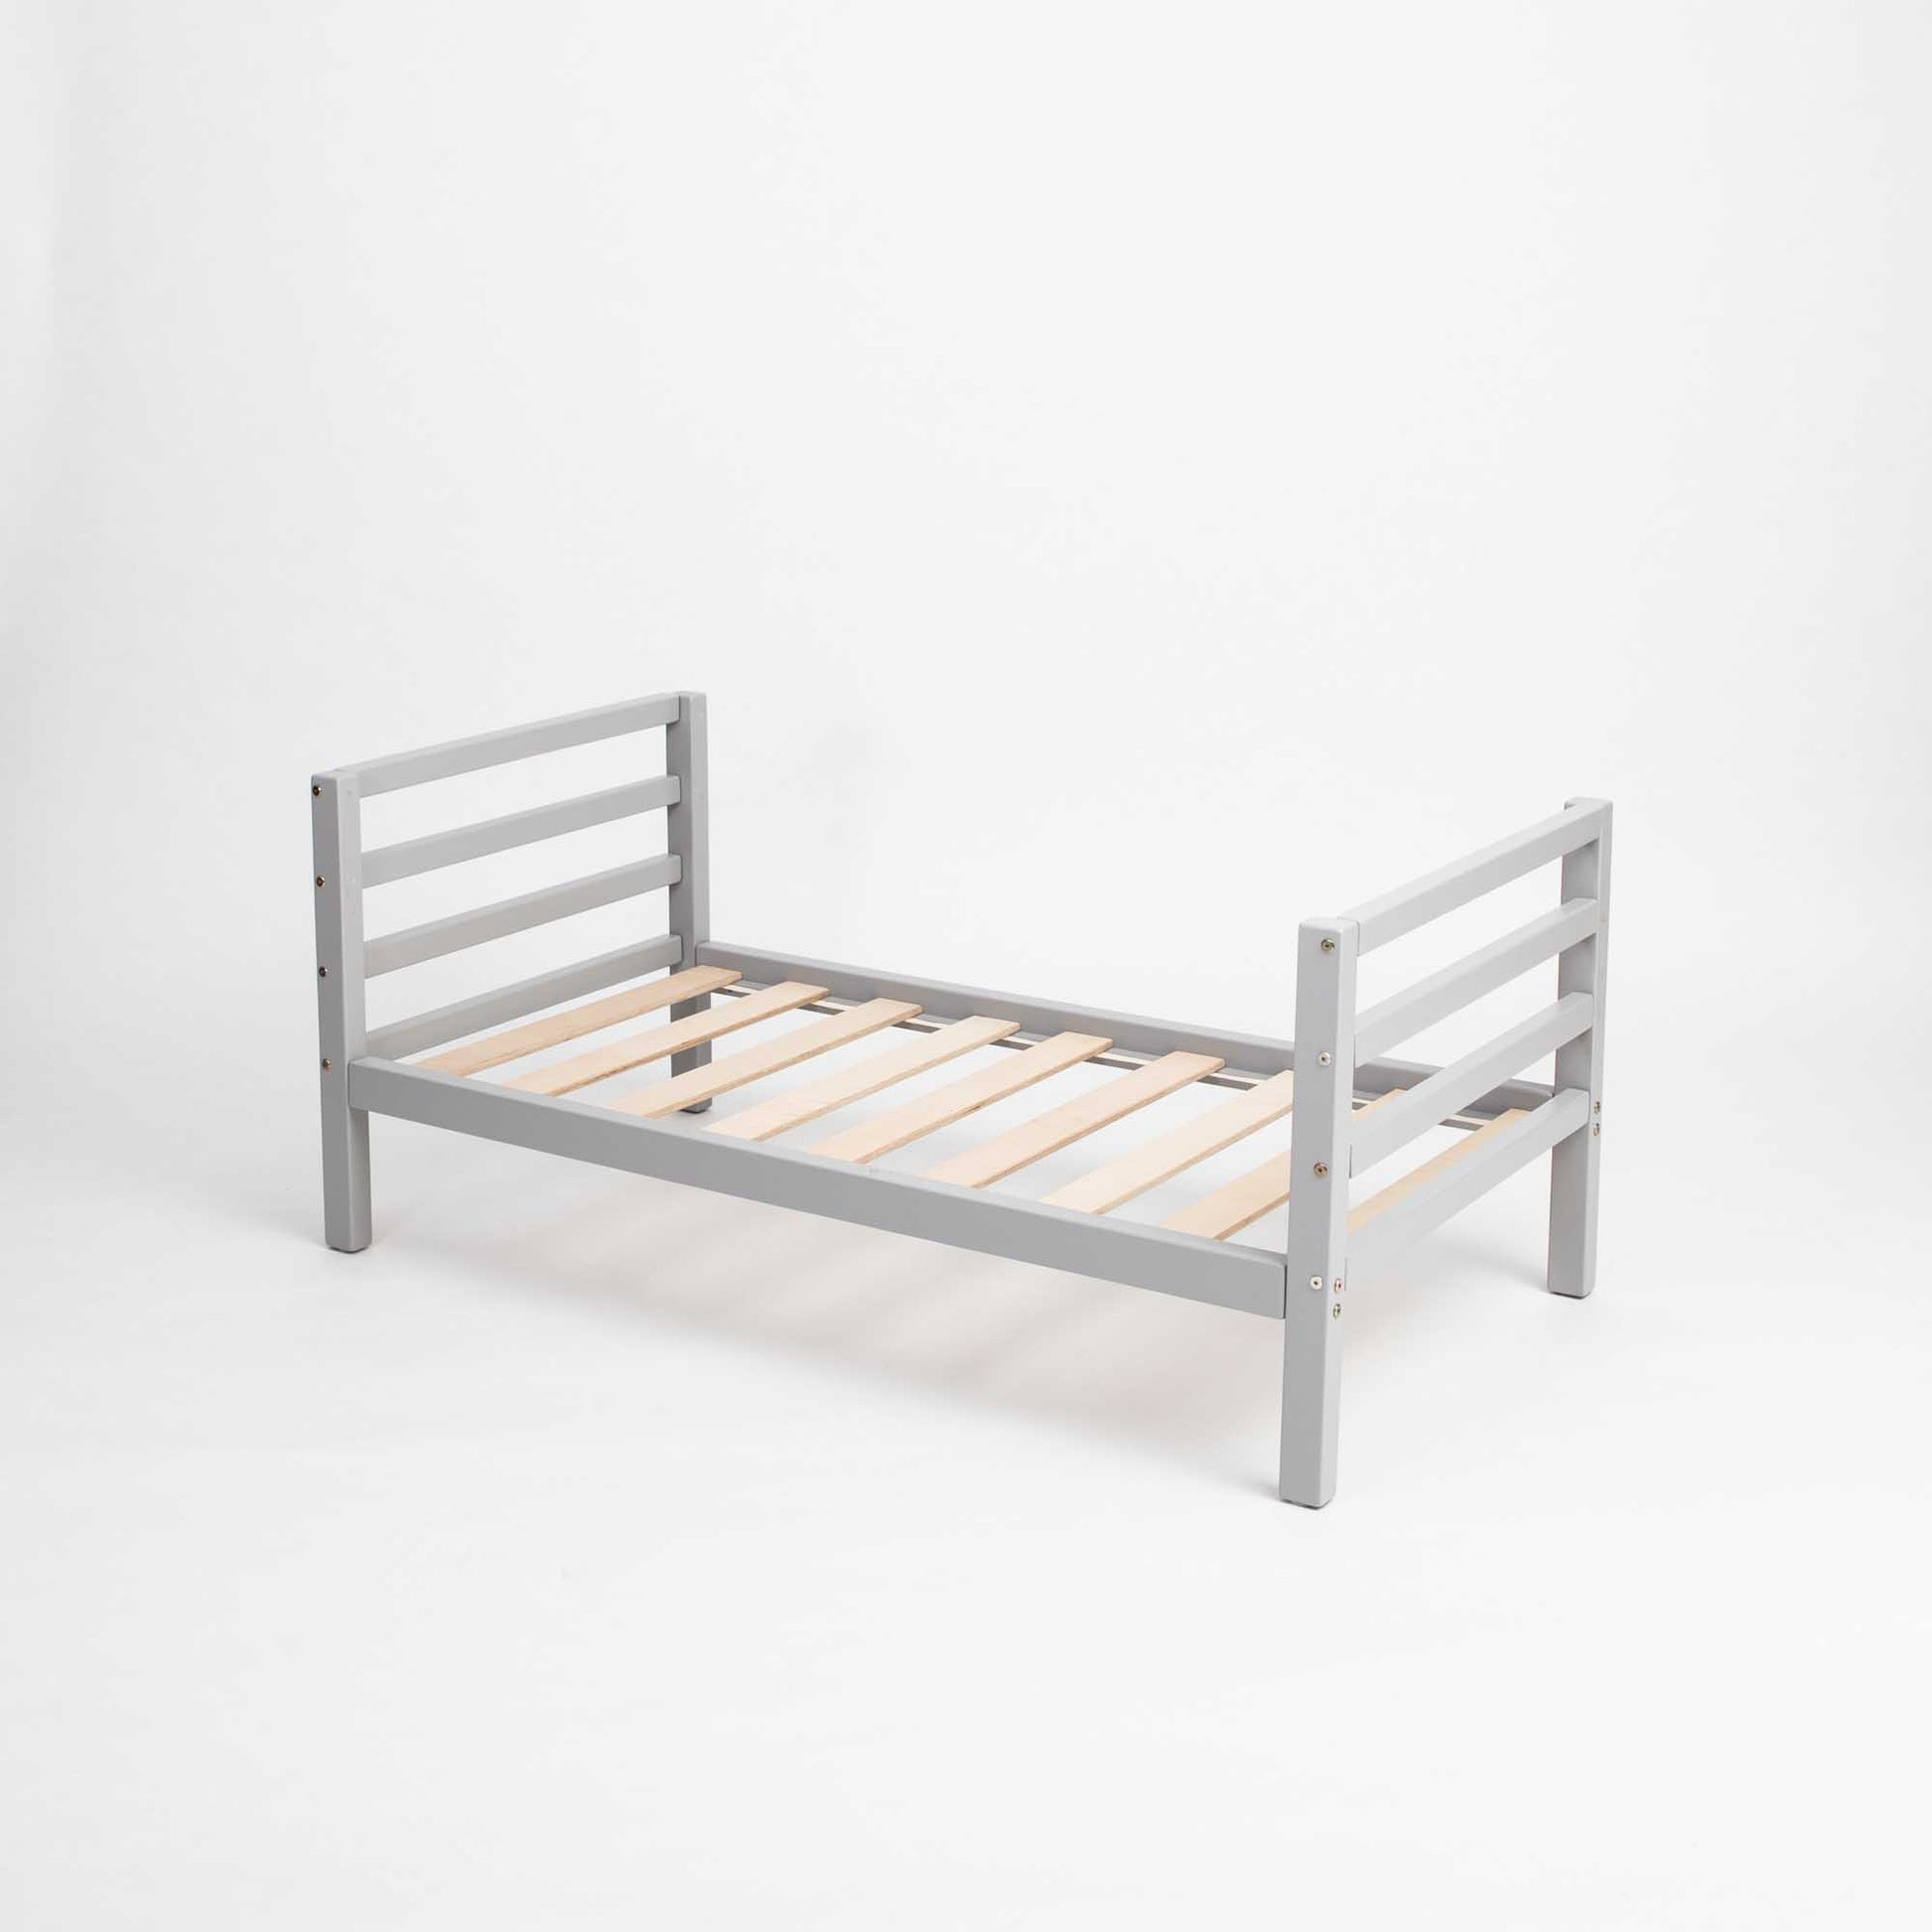 A Sweet Home From Wood kids' bed on legs with a horizontal rail headboard and footboard made of grey wooden slats against a white background.